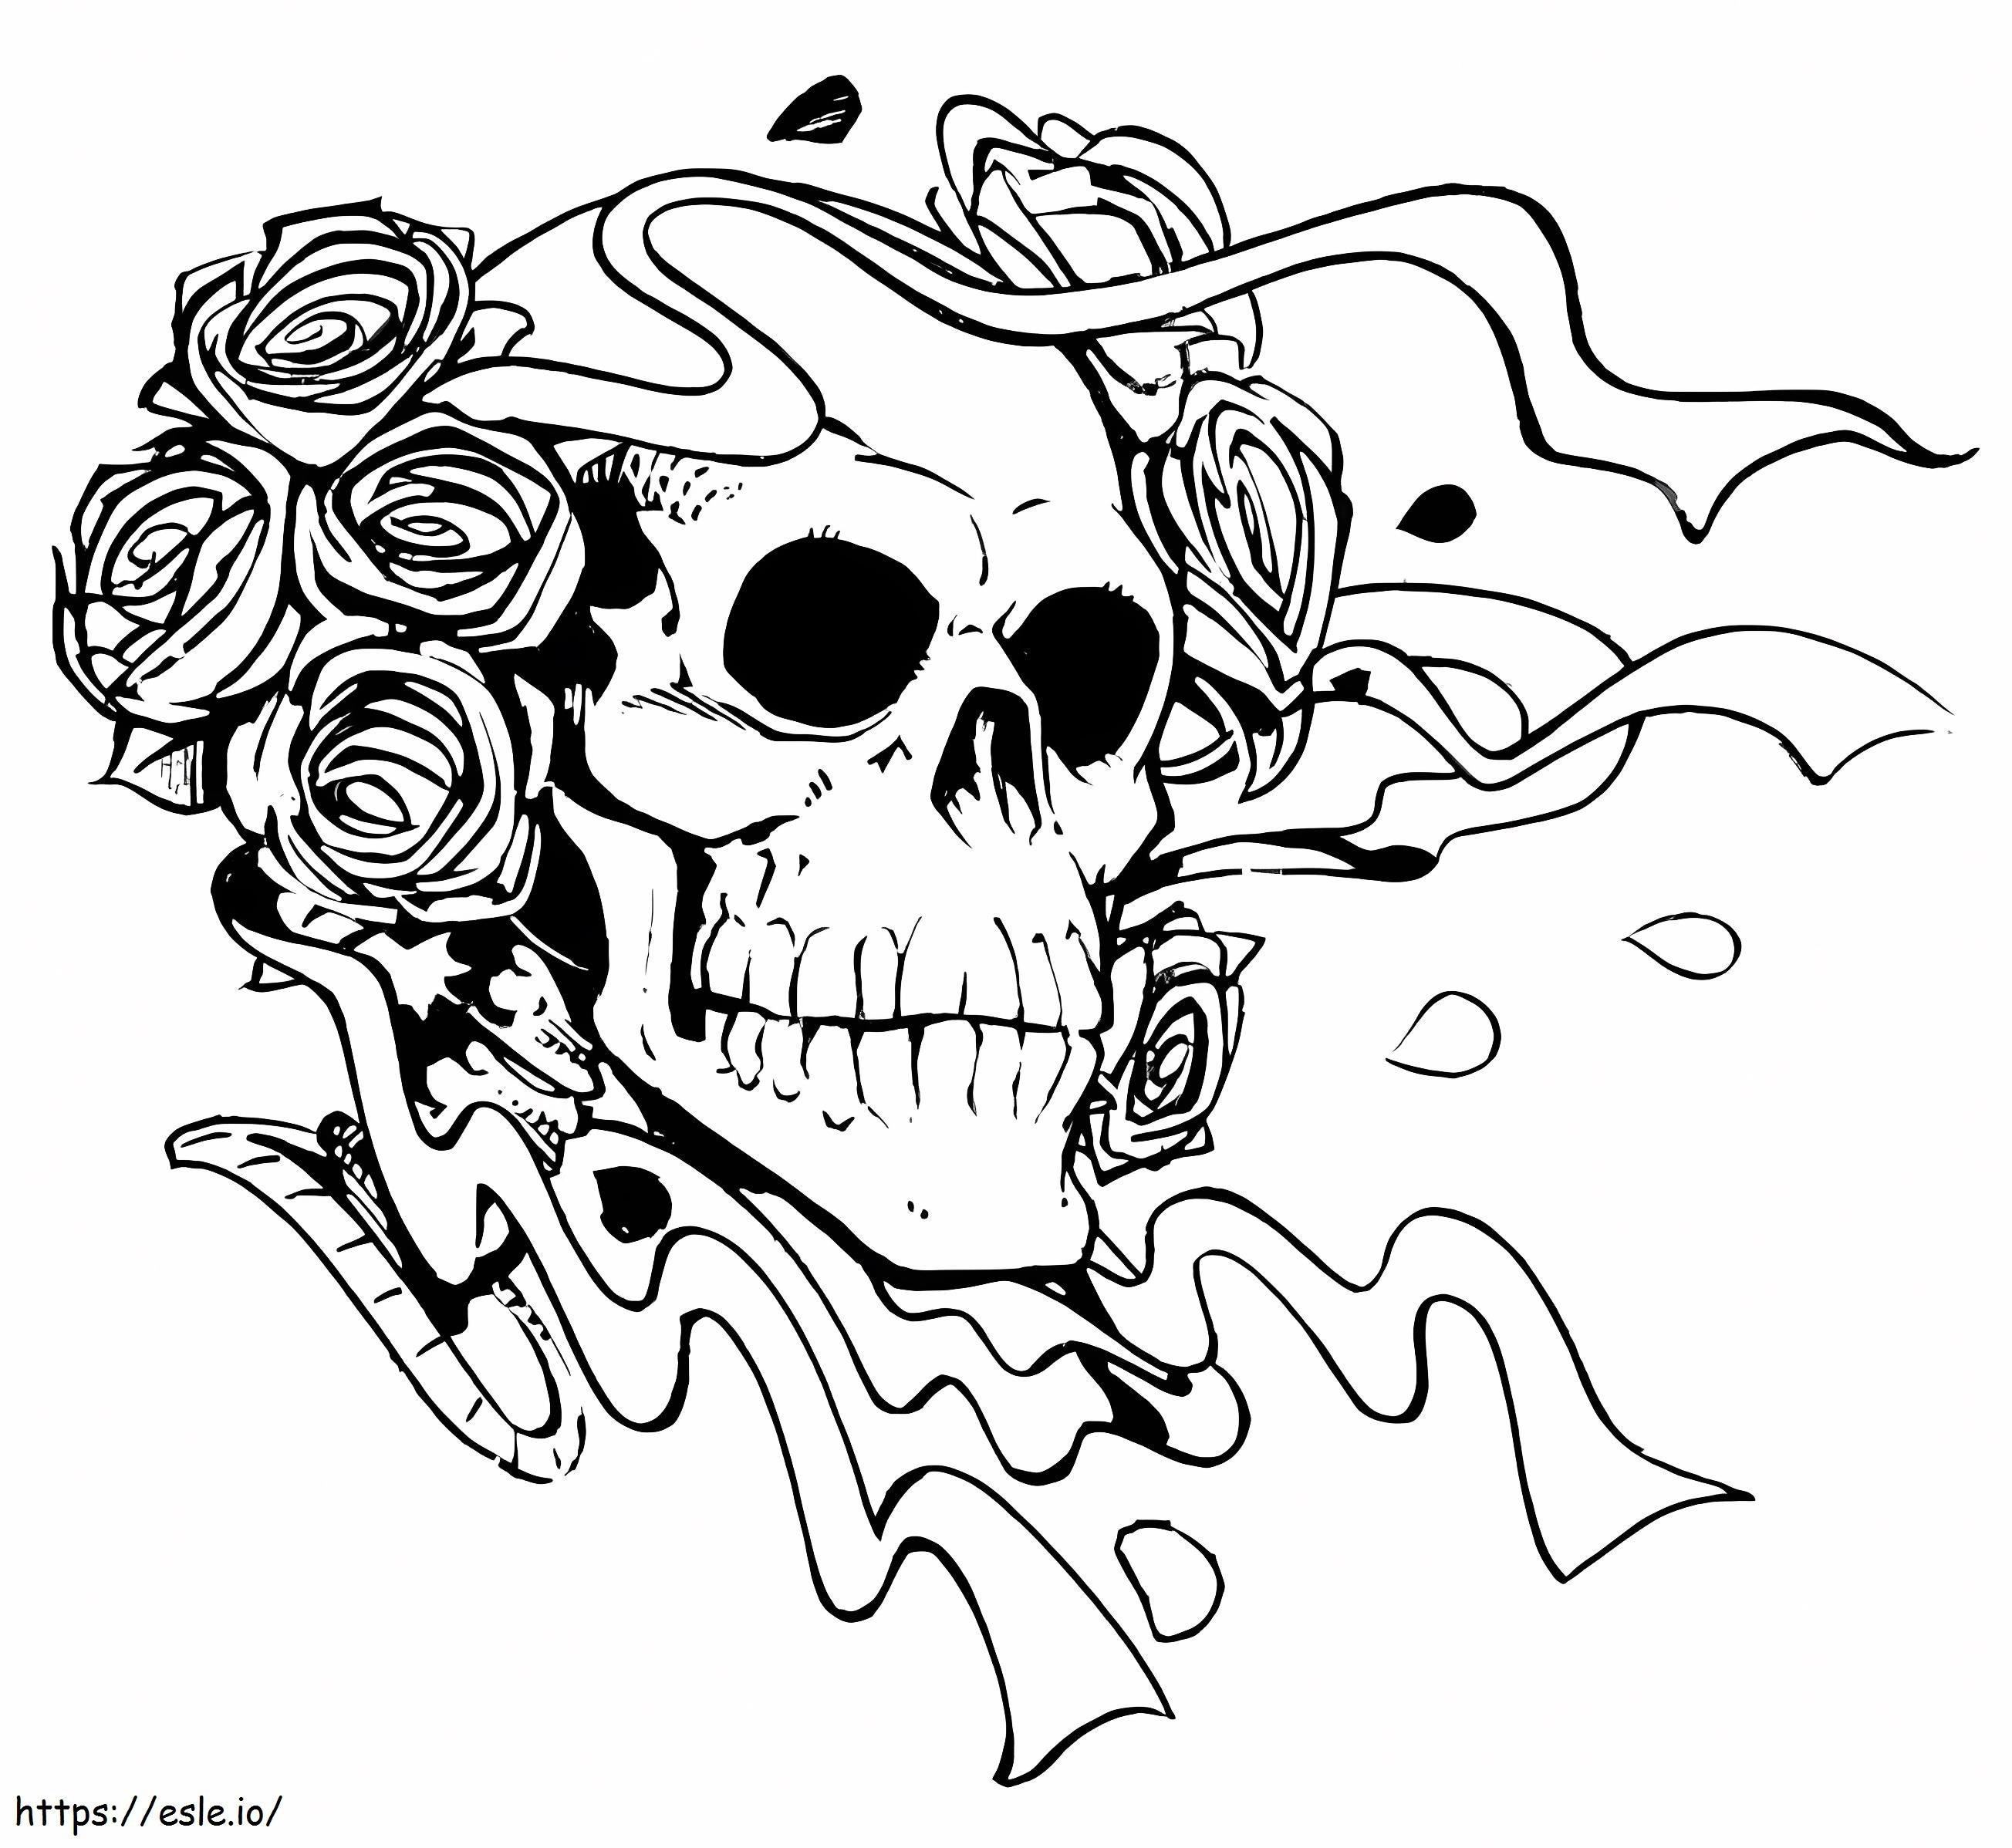 Skull And Roses Horror coloring page